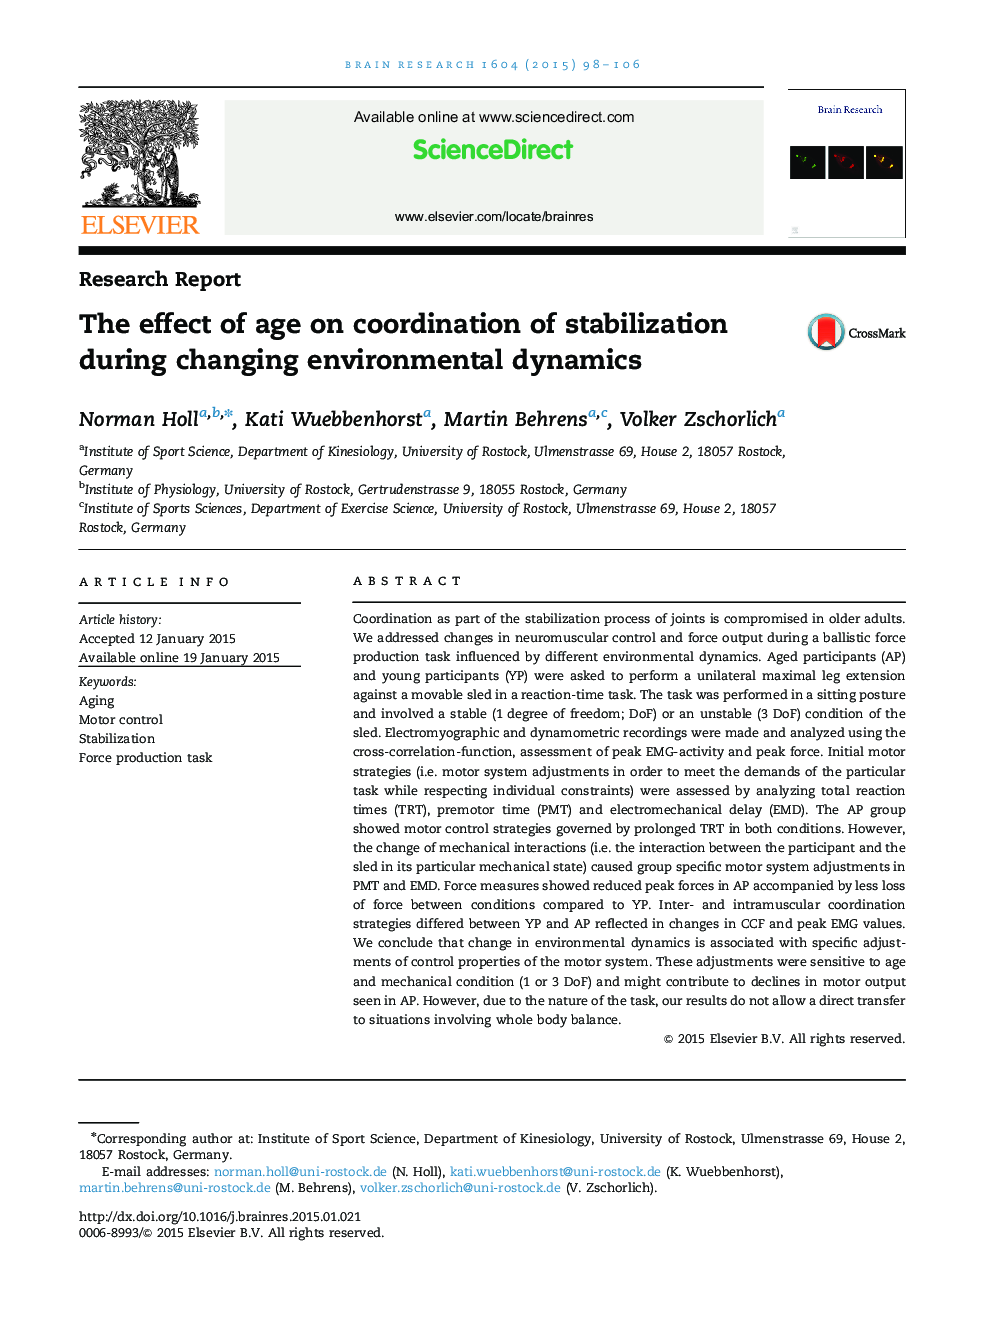 The effect of age on coordination of stabilization during changing environmental dynamics